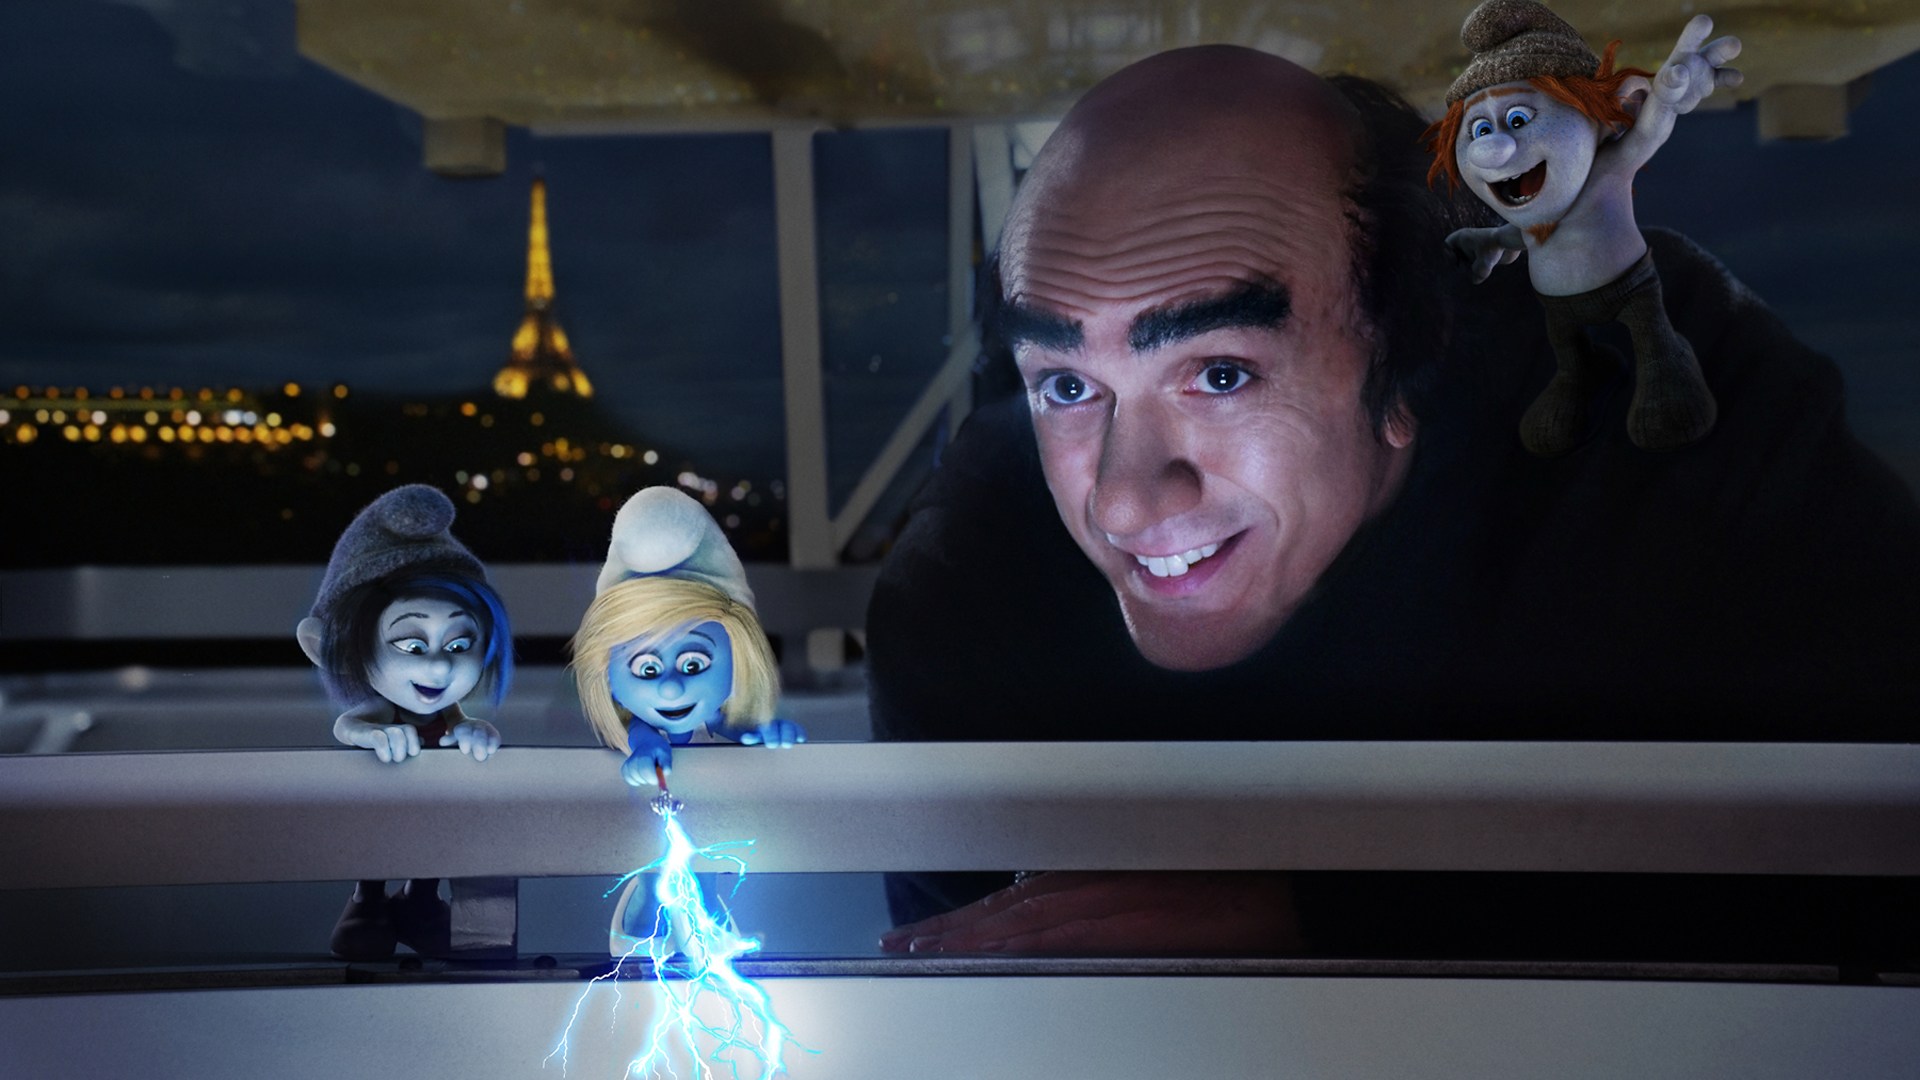 Gargamel (Hank Azaria)  surrounded by Vexy (voiced by Christina Ricci), Smurfette (voiced by Katy Perry), and Hackus (voiced by J.B. Smoove) in The Smurfs 2 (2013)